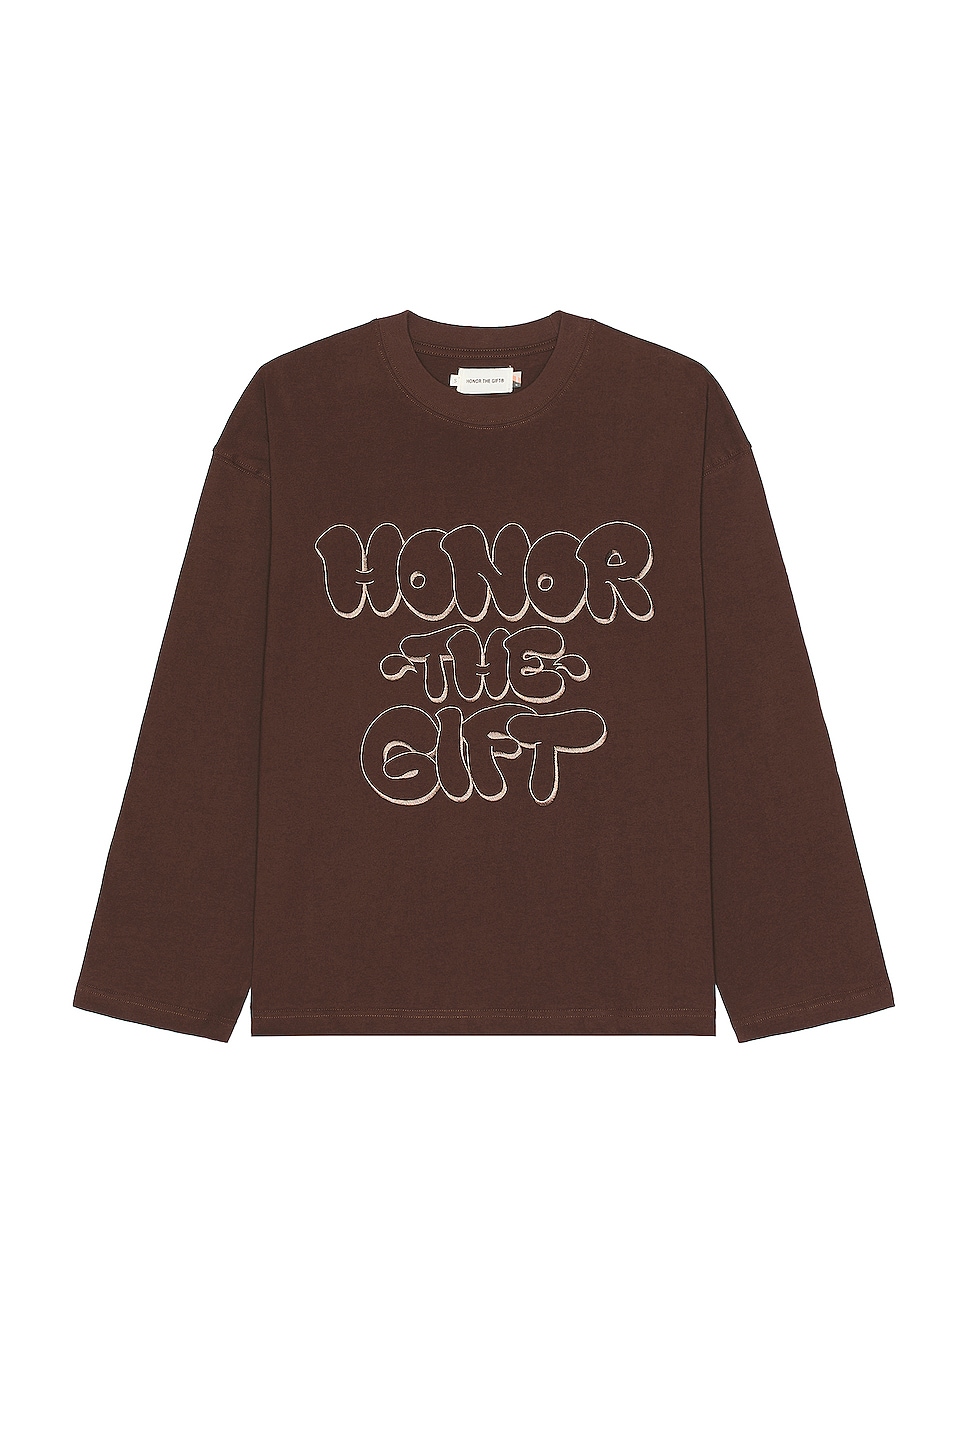 Image 1 of Honor The Gift Amp'd Up Tee in Brown